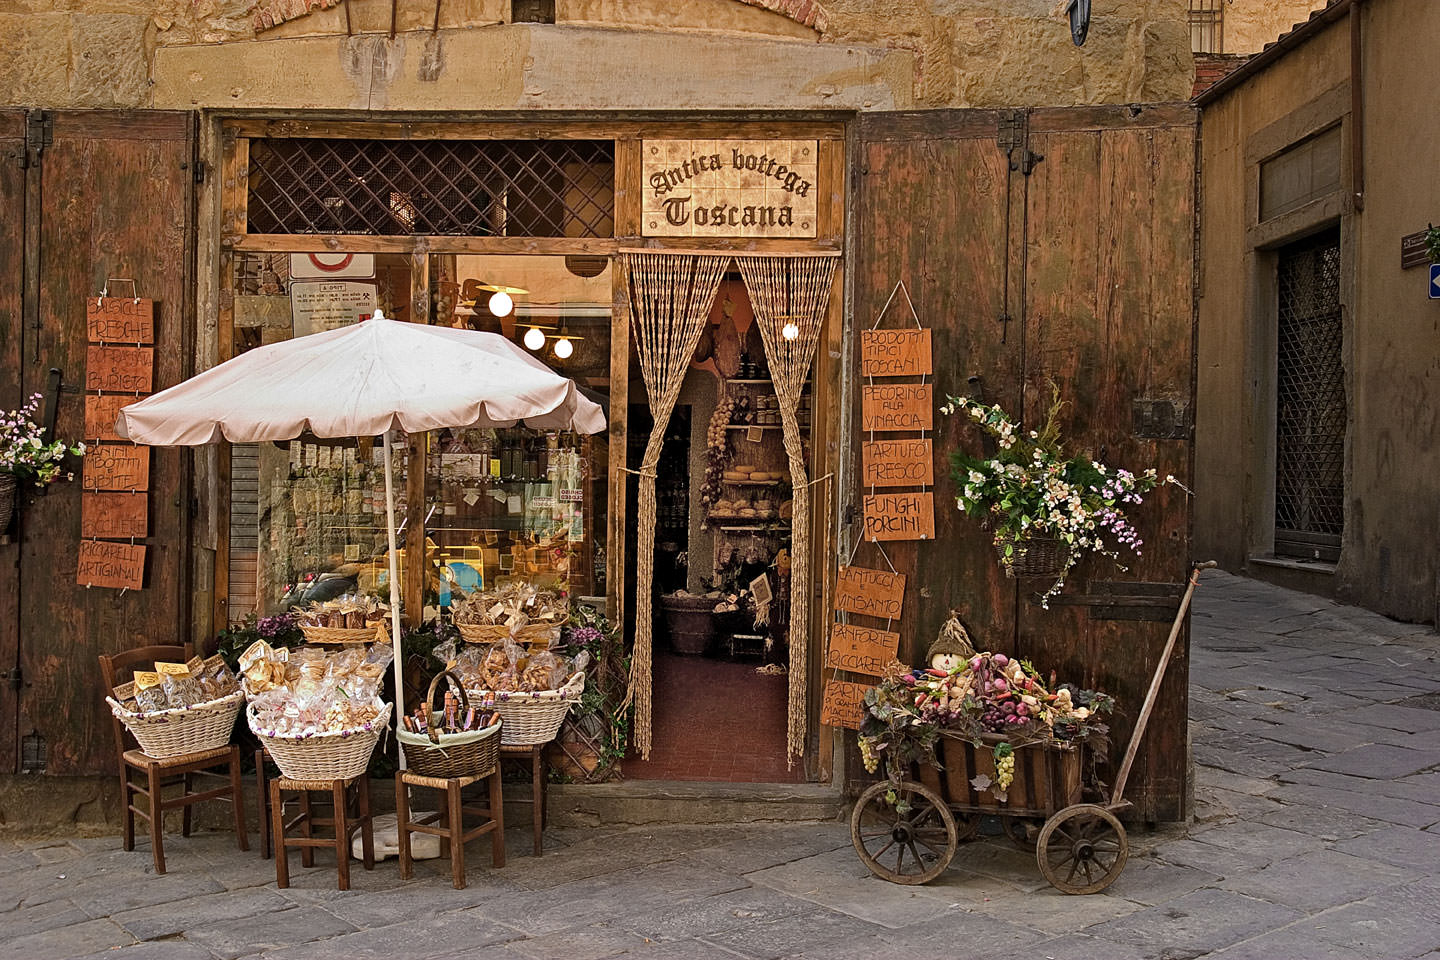 
Groceries in Arezzo